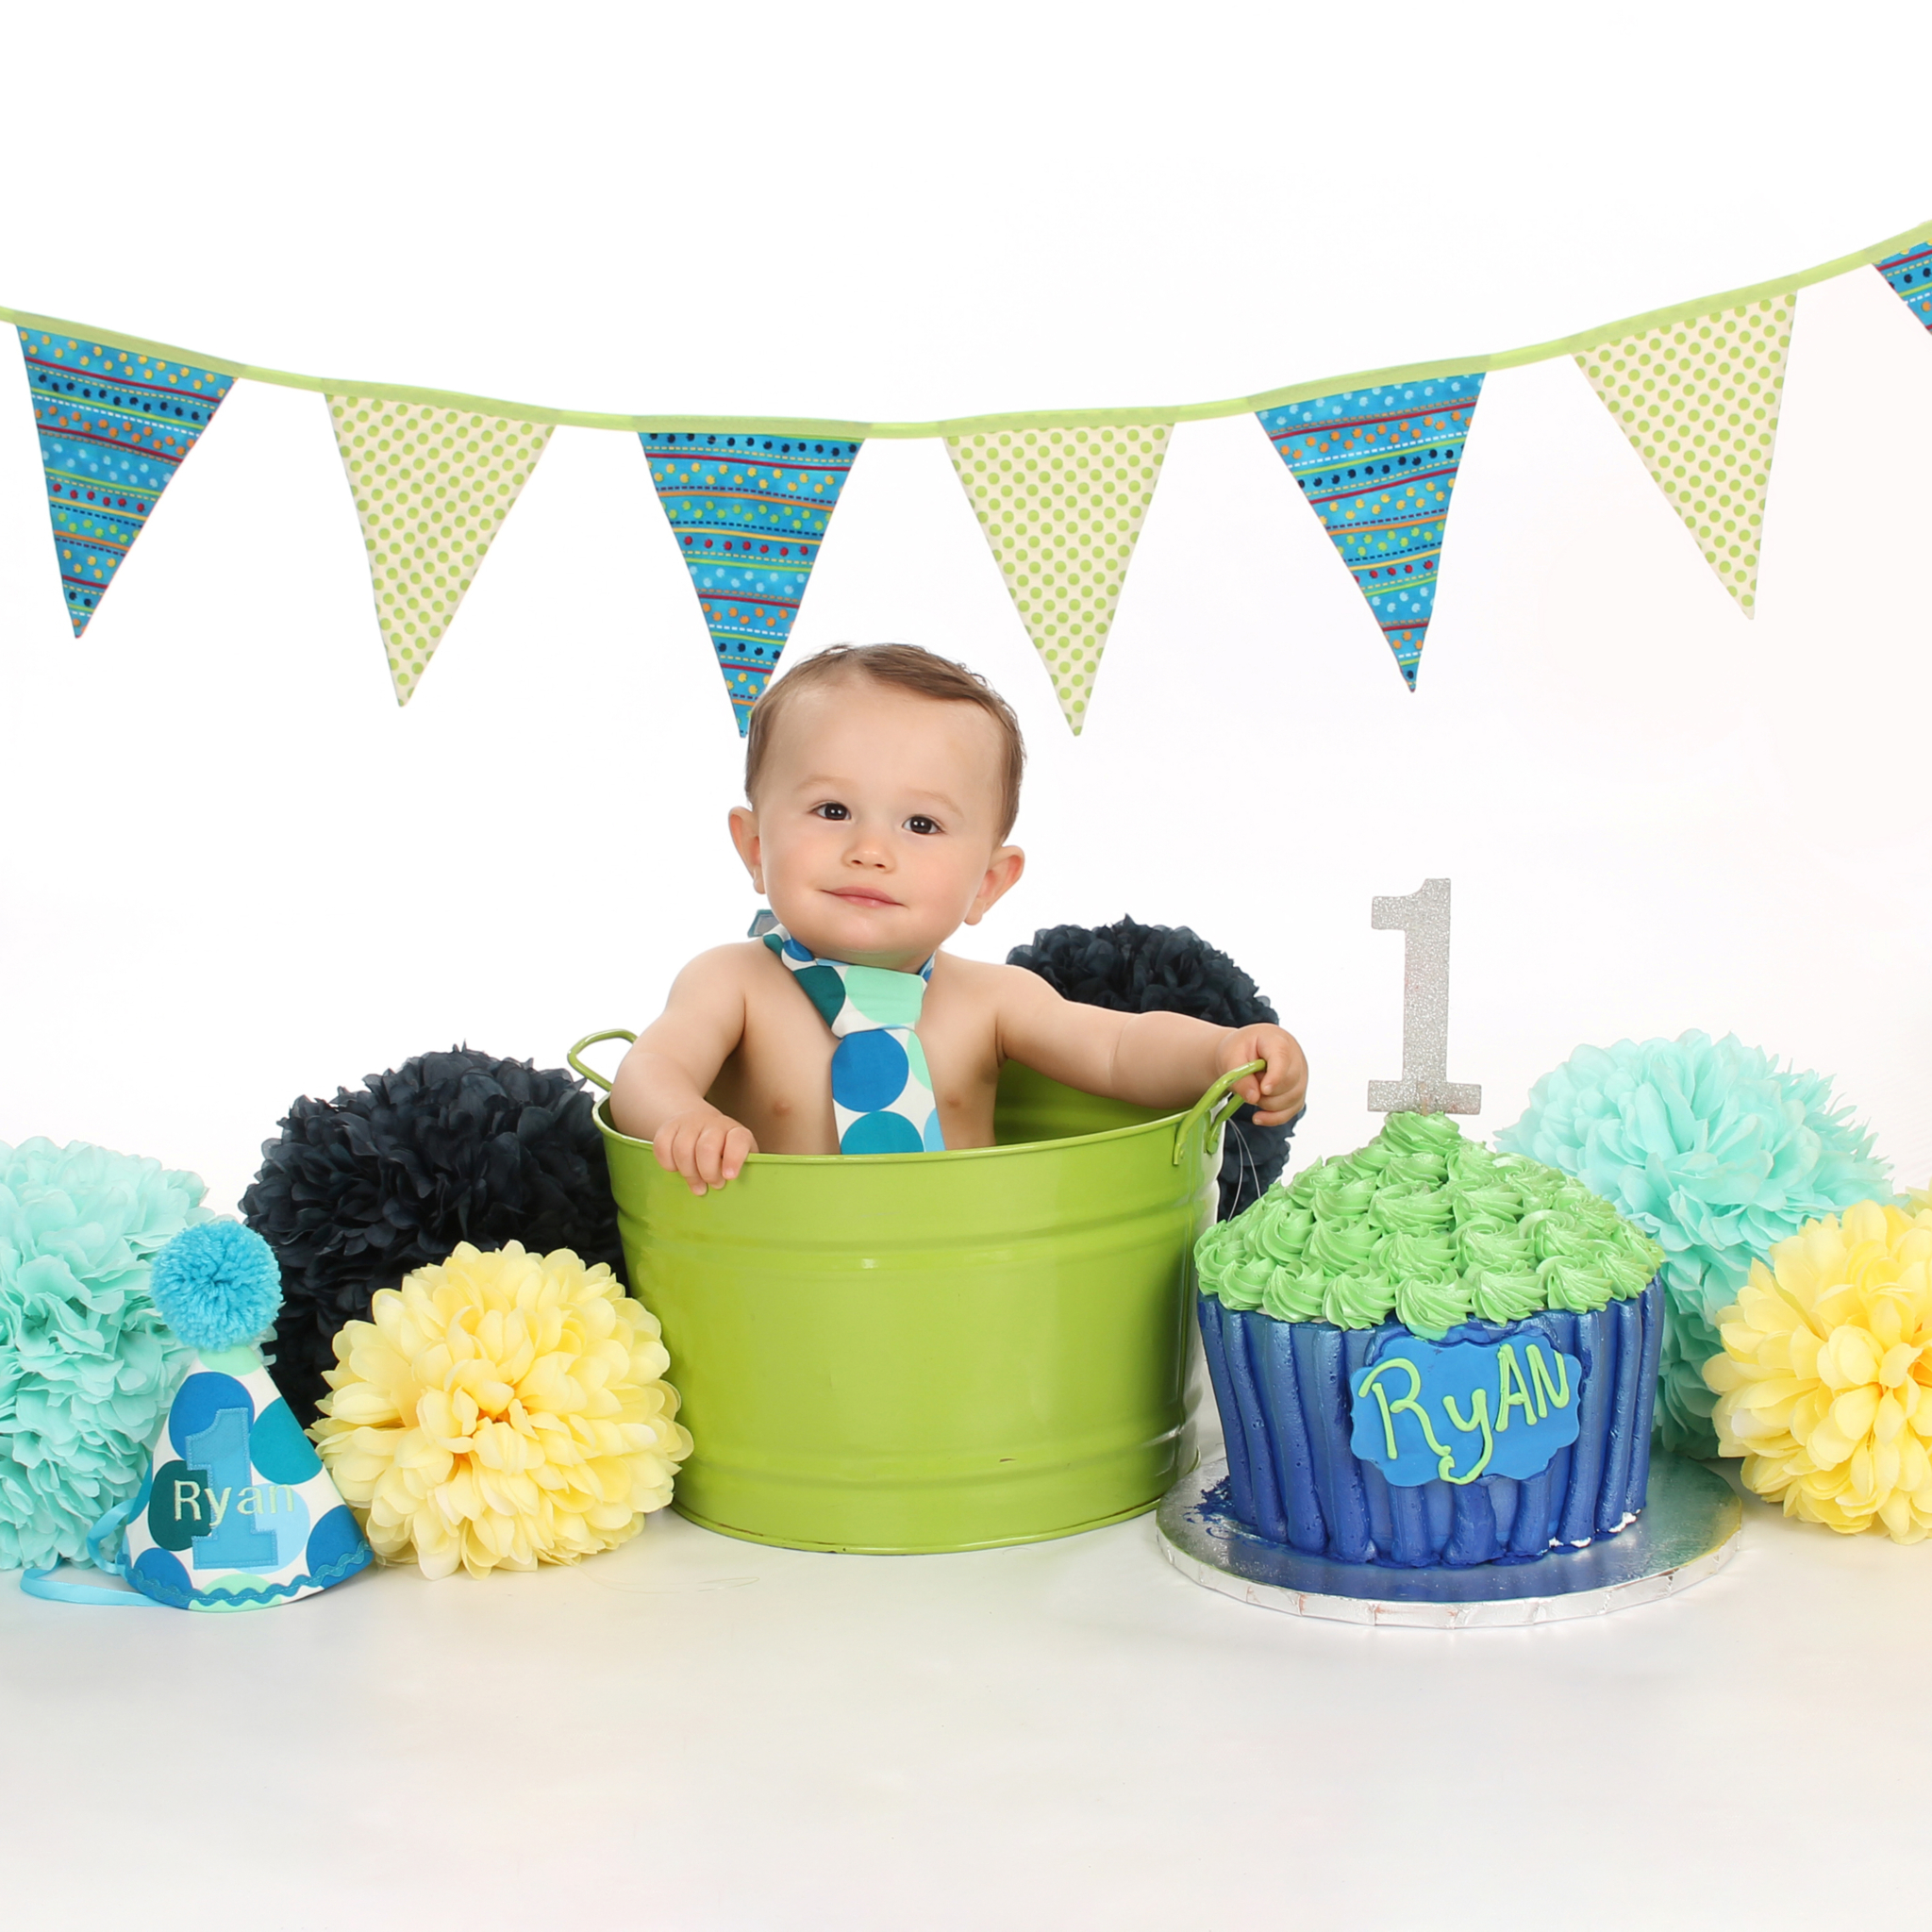 Banner w/Green, Blue & Yellow Poofs in Bucket On White